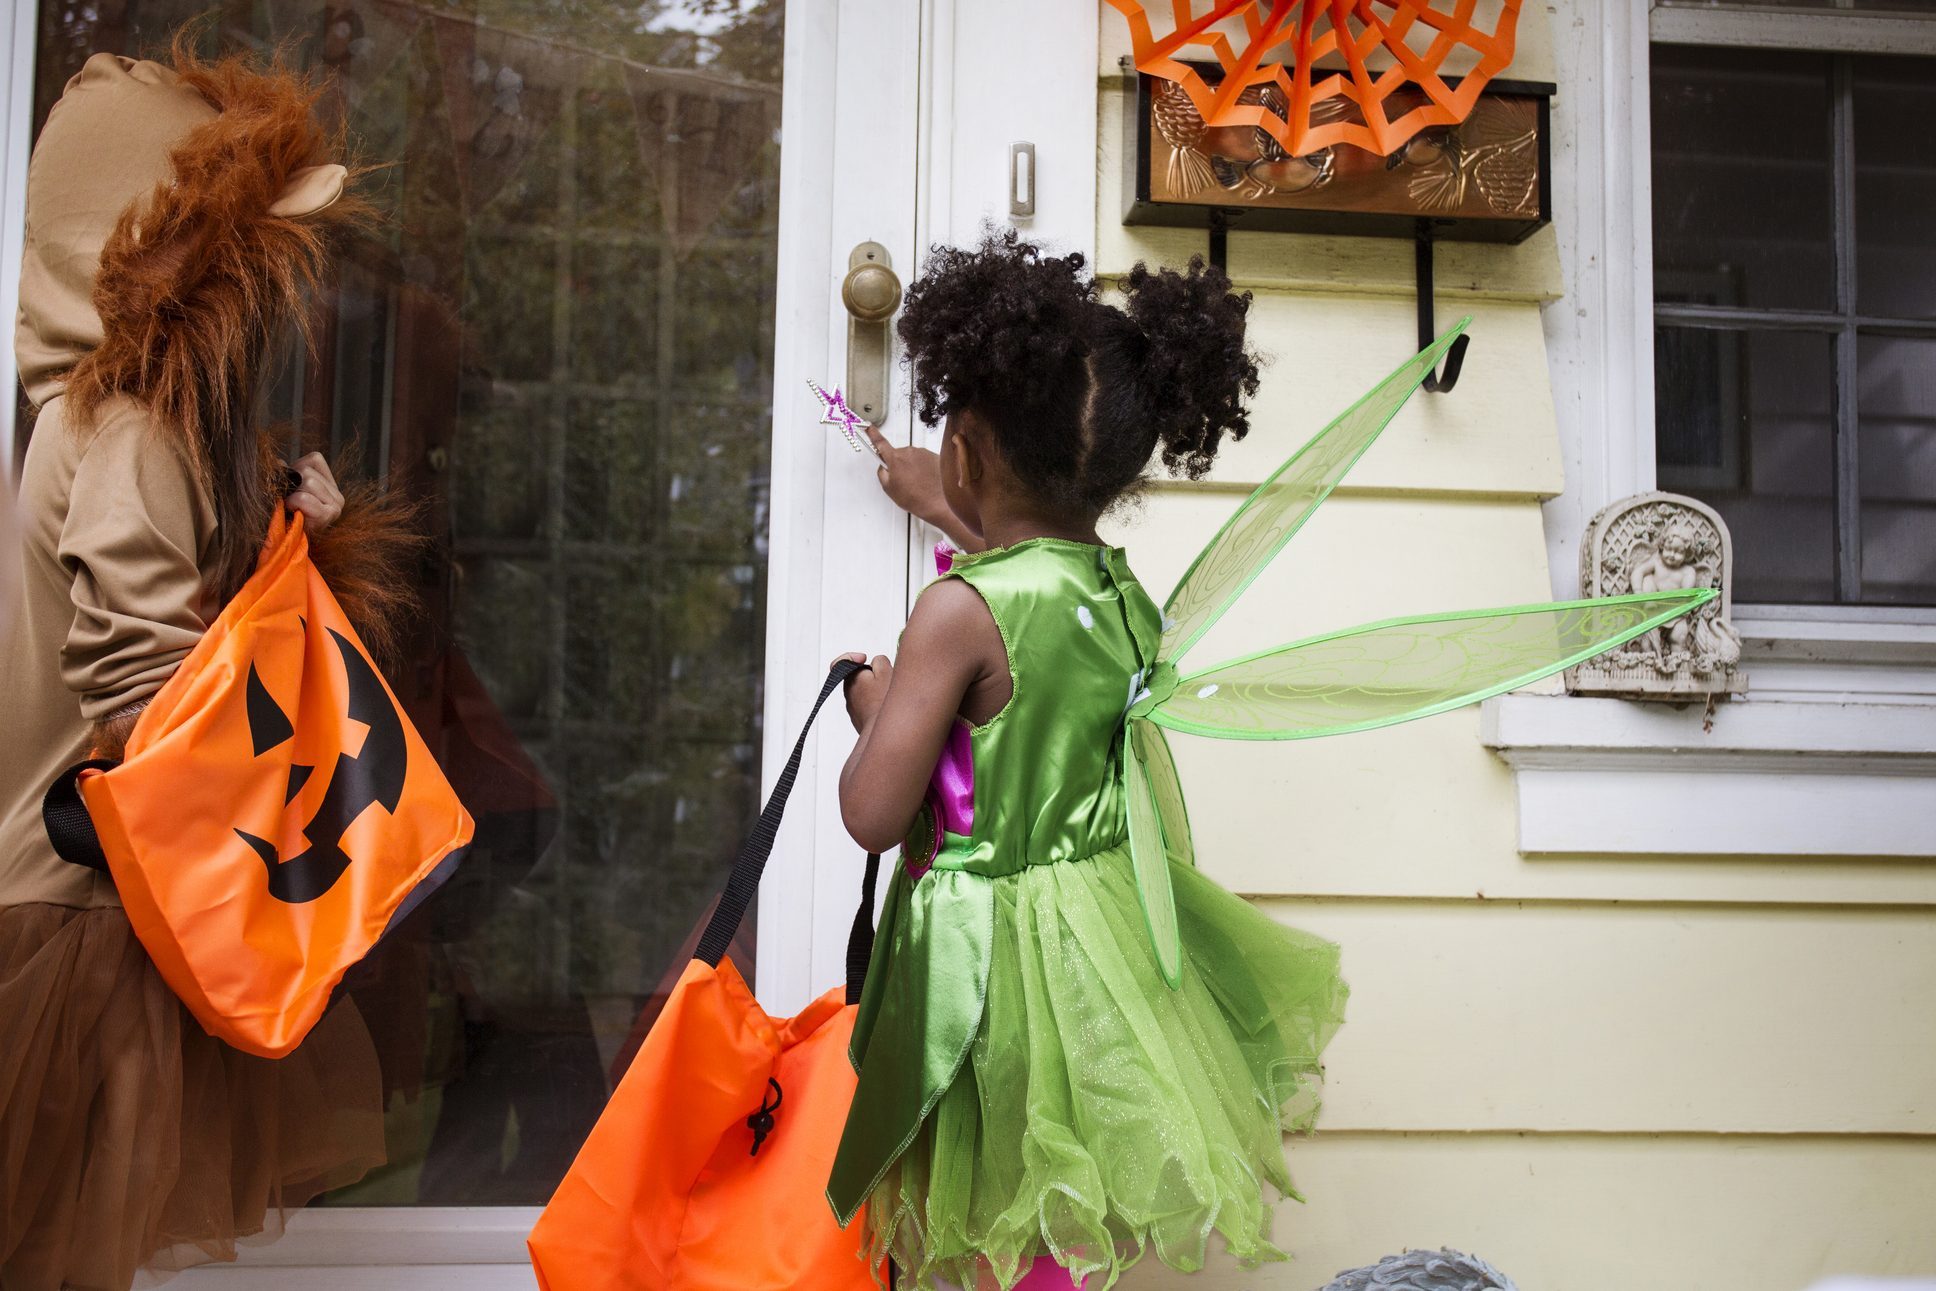 When Does TrickorTreating Start in 2022? Reader's Digest